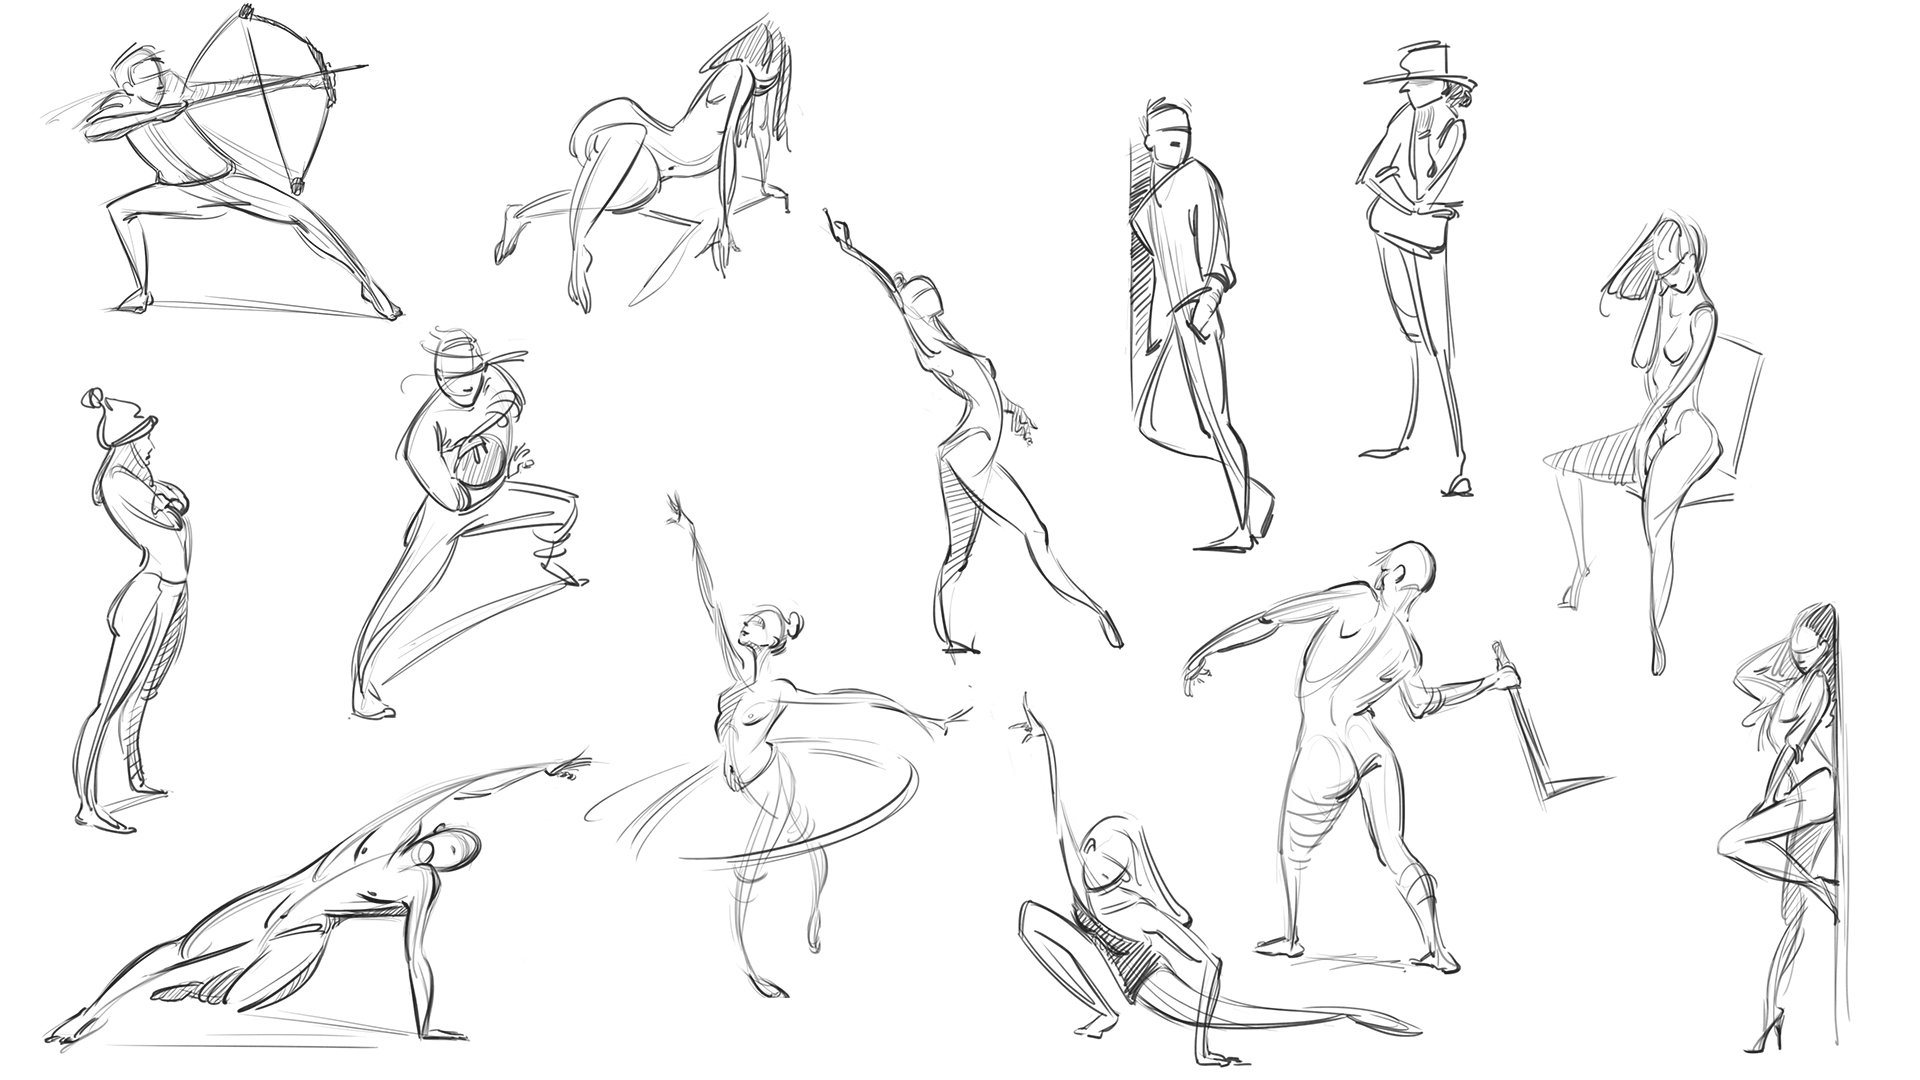 Do character design with 2 dynamic poses by Abahtety | Fiverr